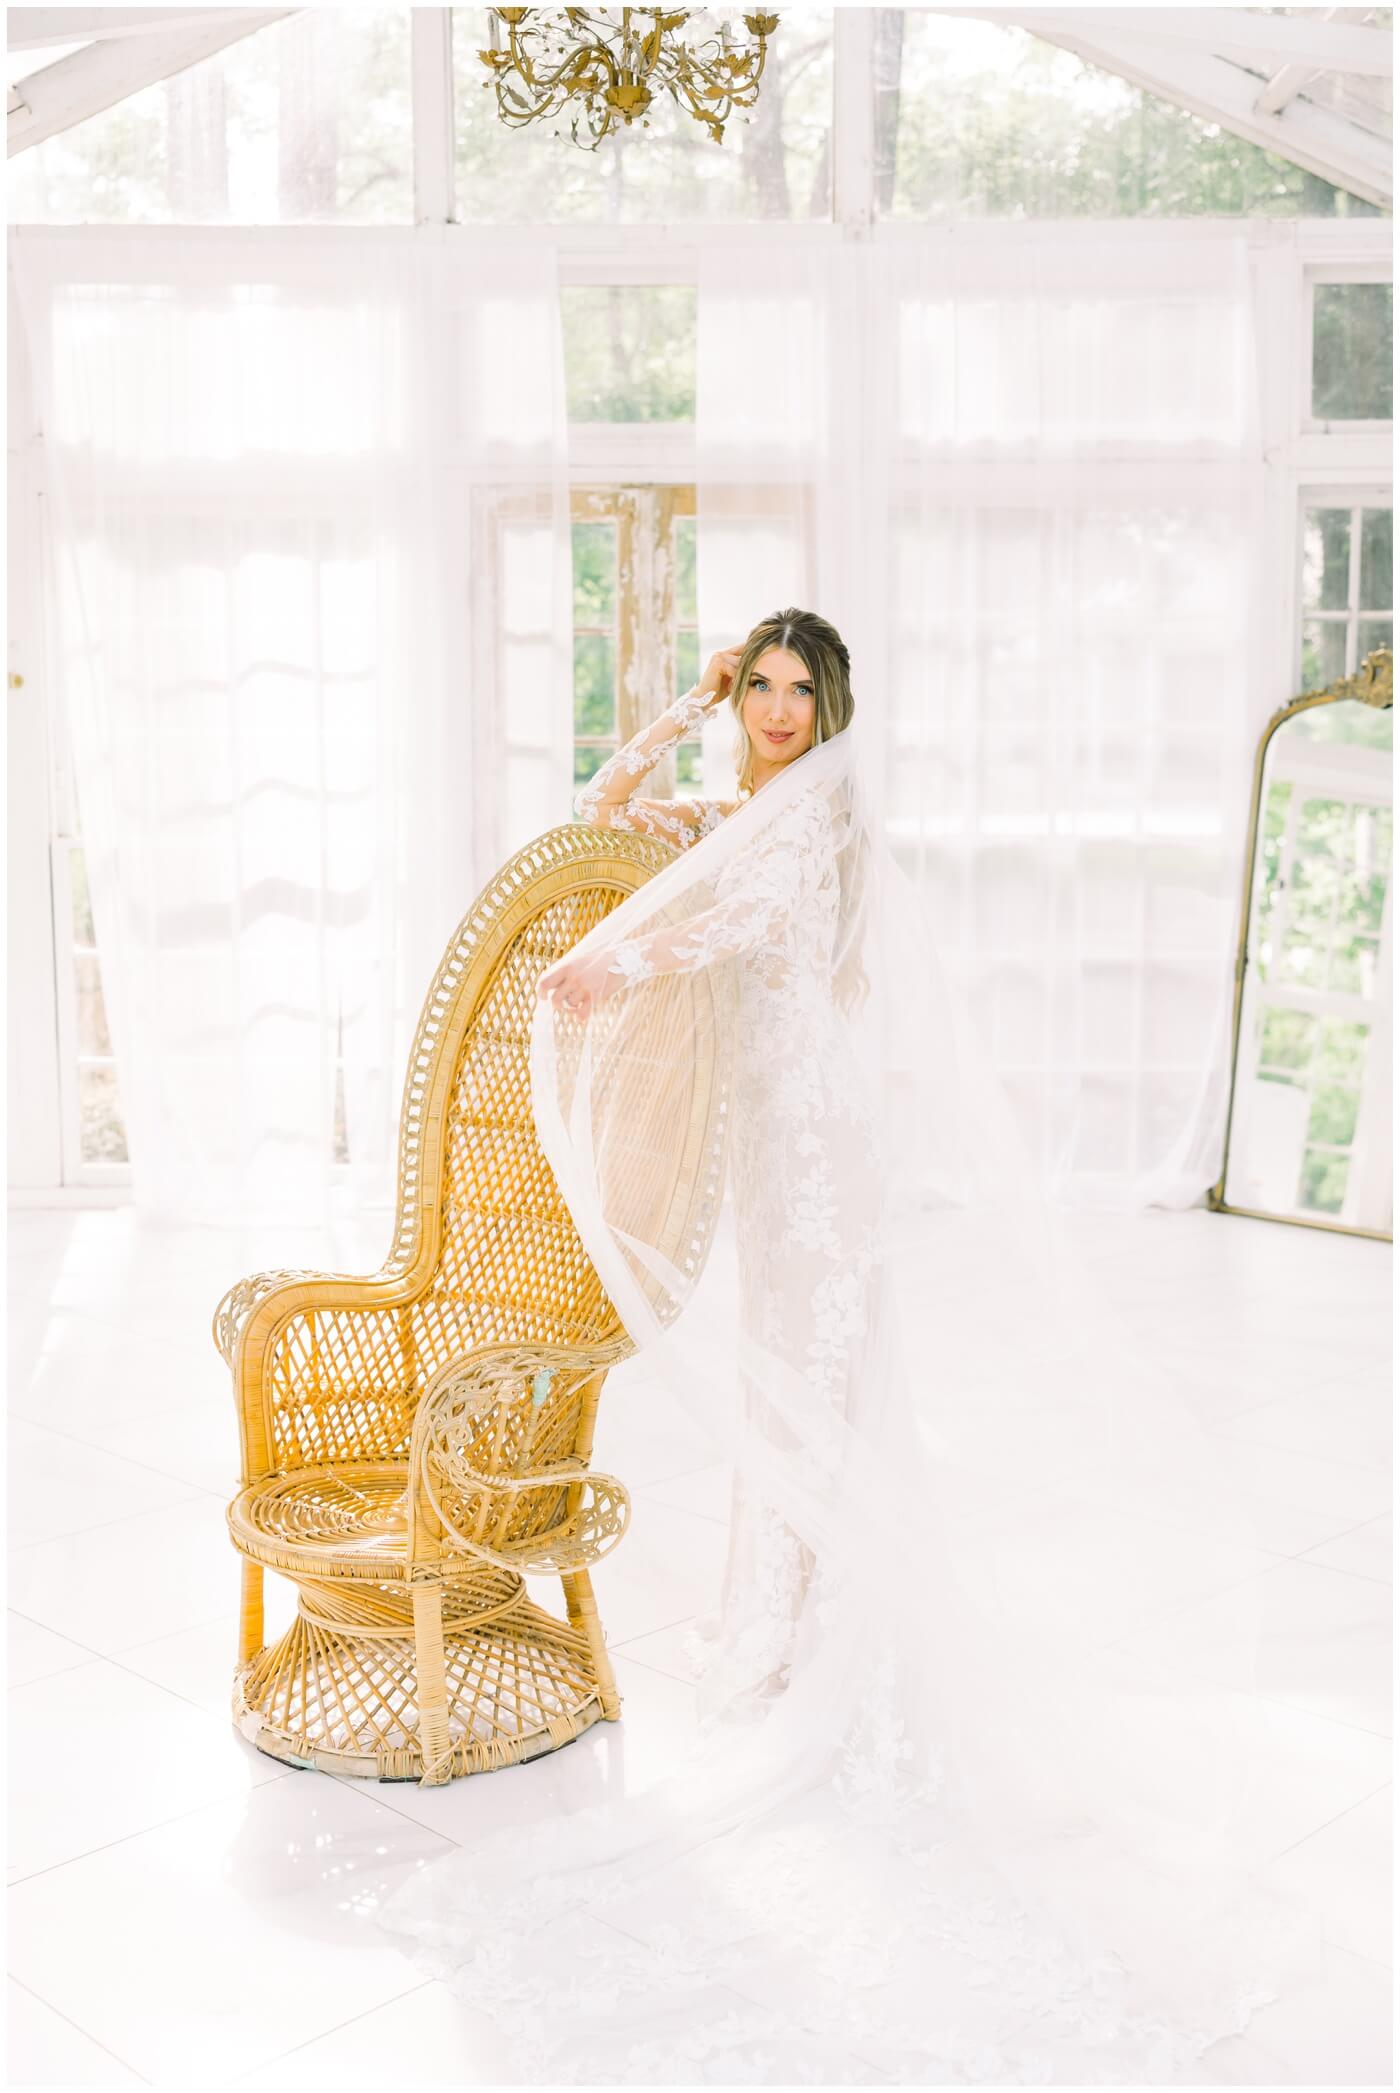 Houston wedding photographer | A bride shows off her veil during her bridal session